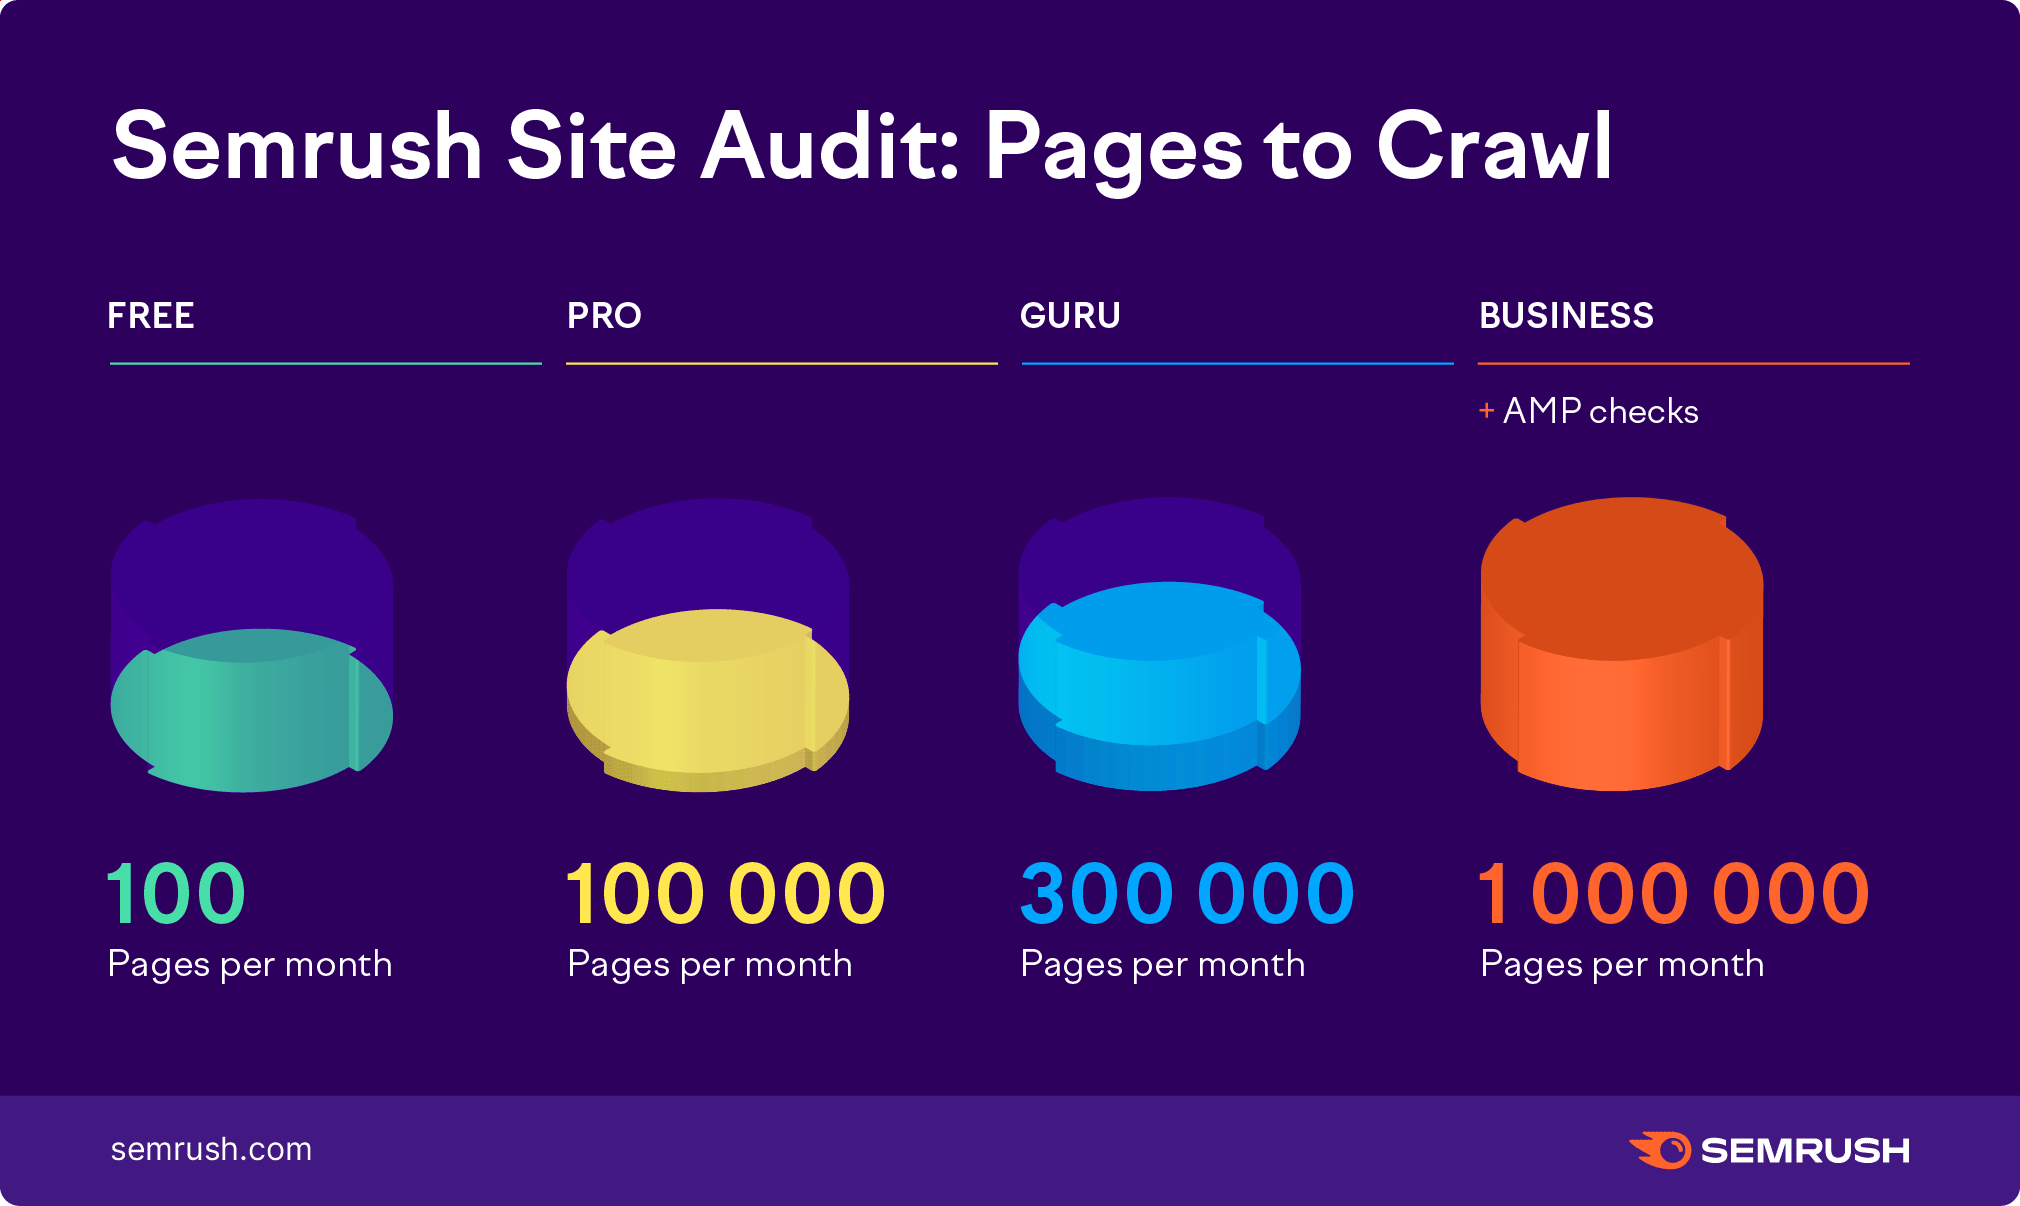 Site Audit Pages to Crawl limits. Free plan: 100 pages per month. Pro plan: 100,000 pages per month. Guru plan: 300,000 pages per month. Business plan: 1,000,000 pages per month and AMP checks. 